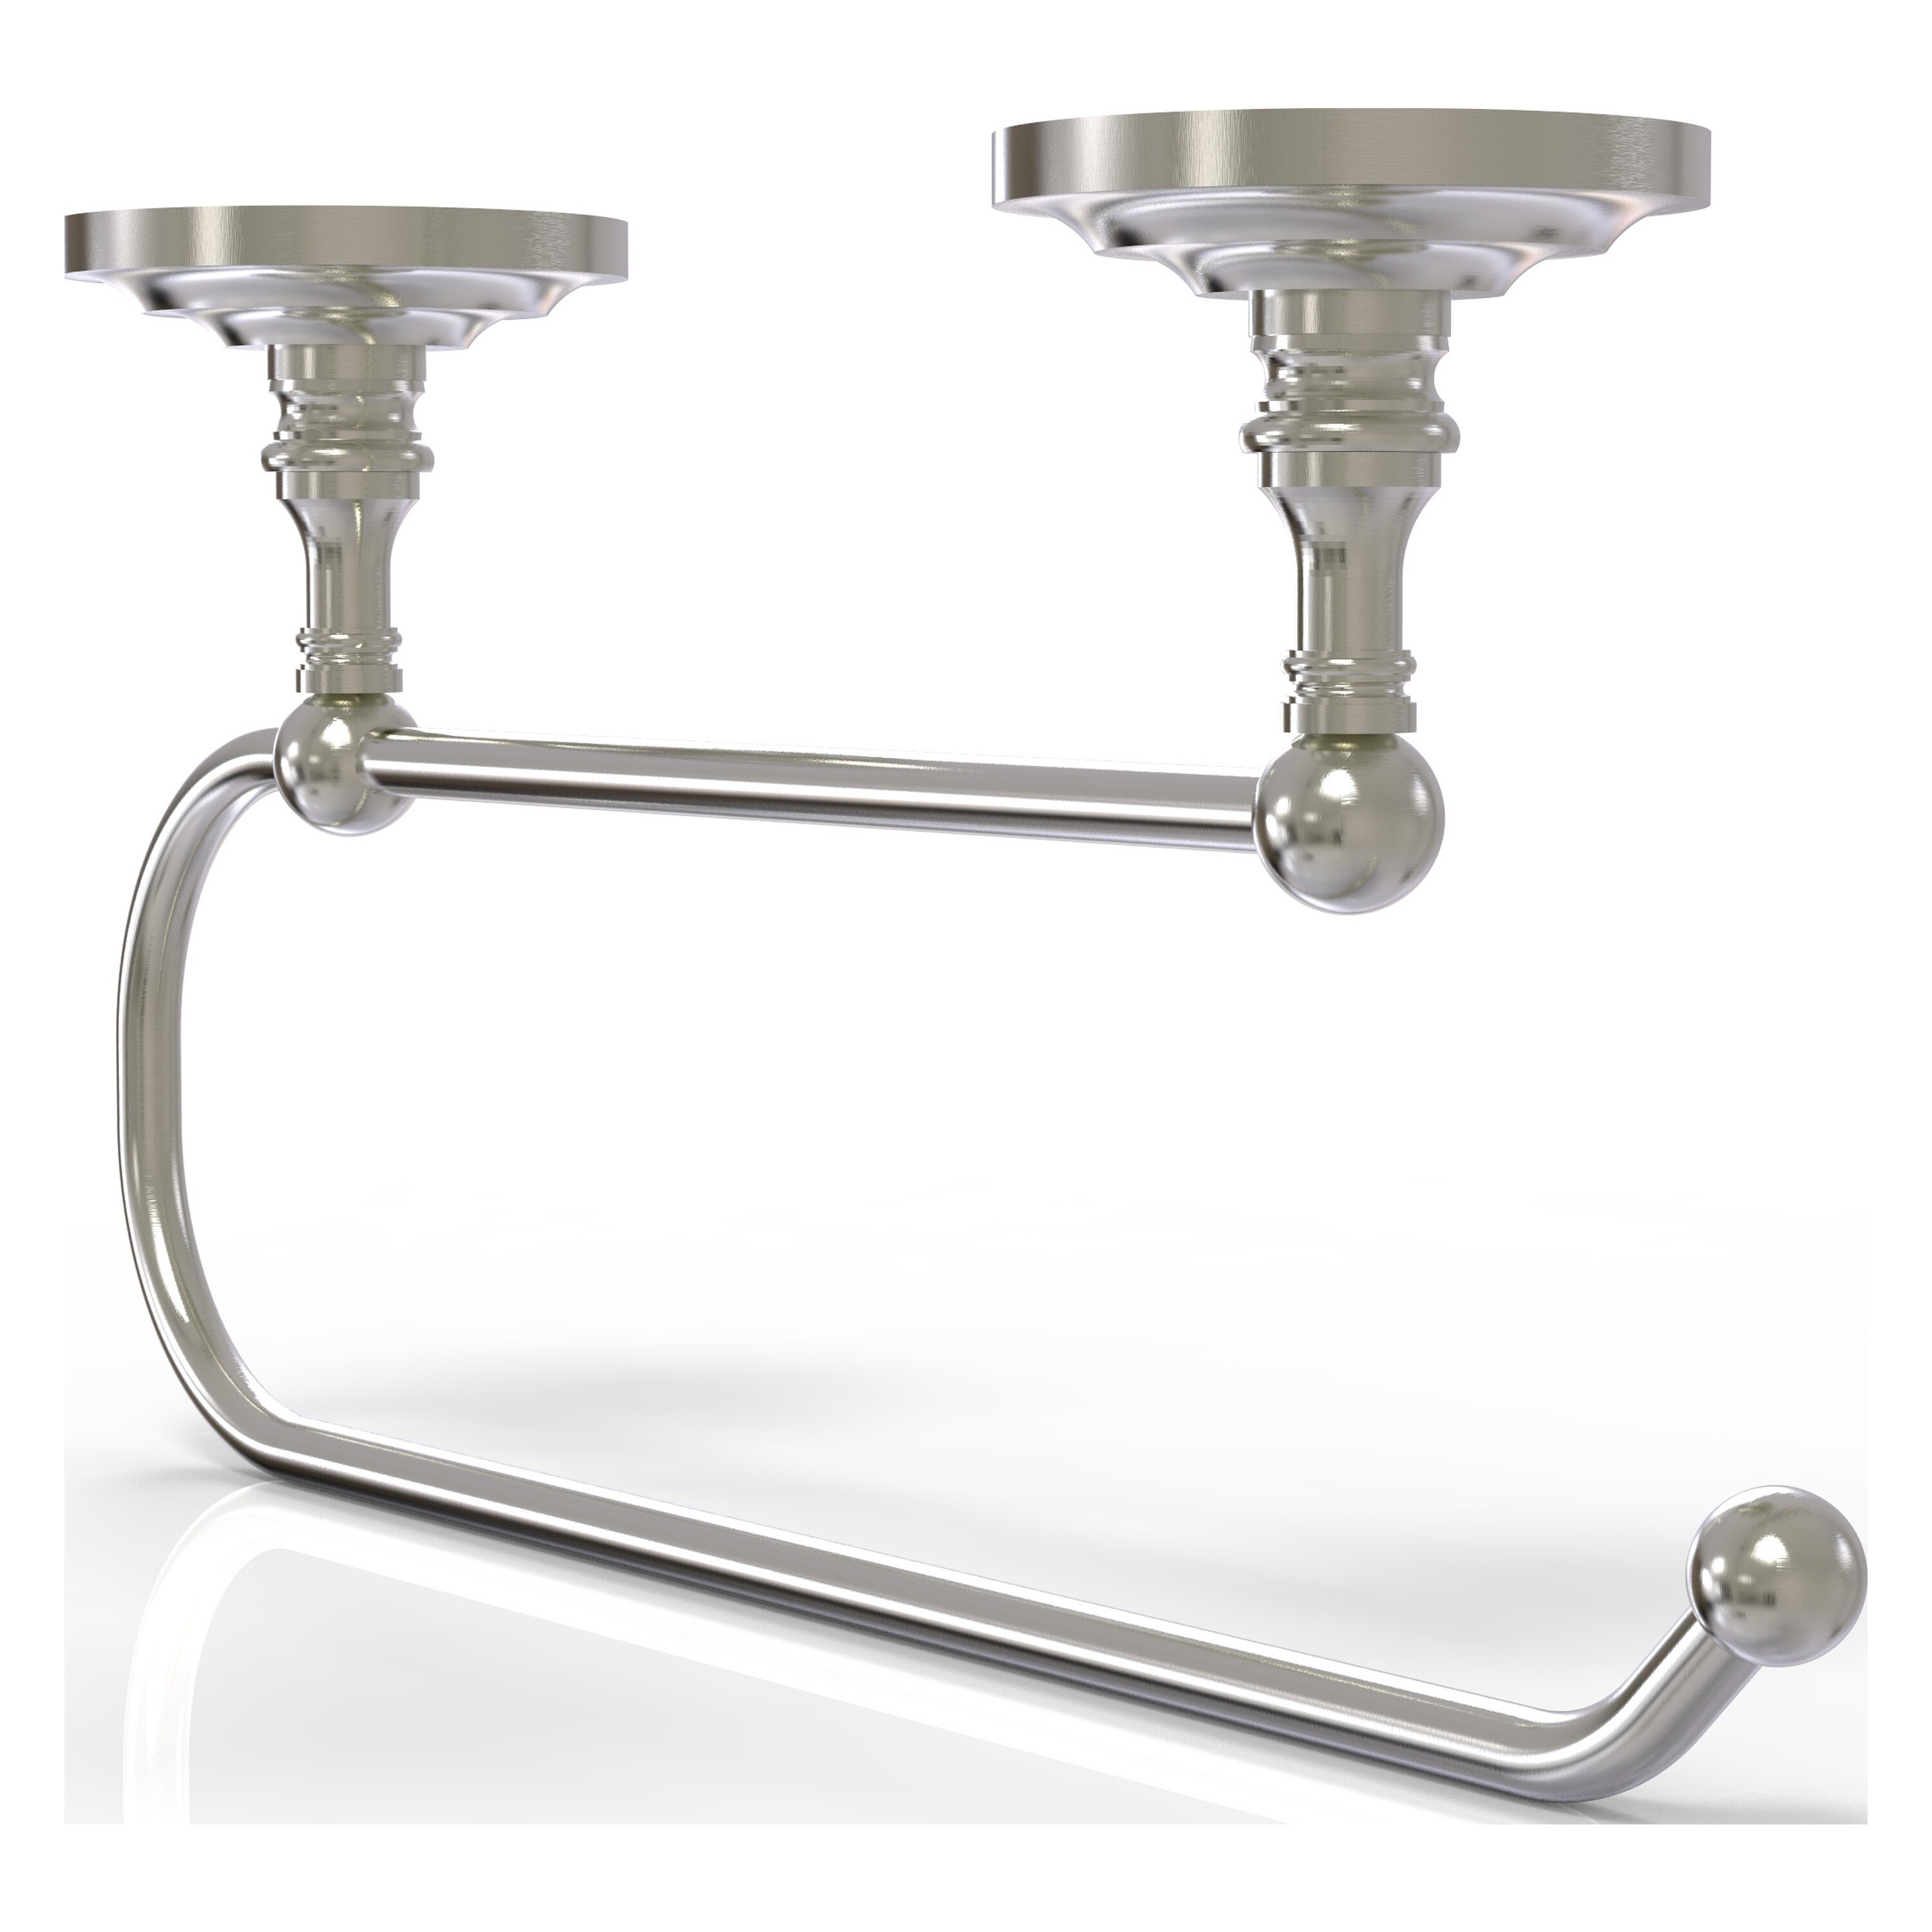 Stainless steel Paper Towel Holders at